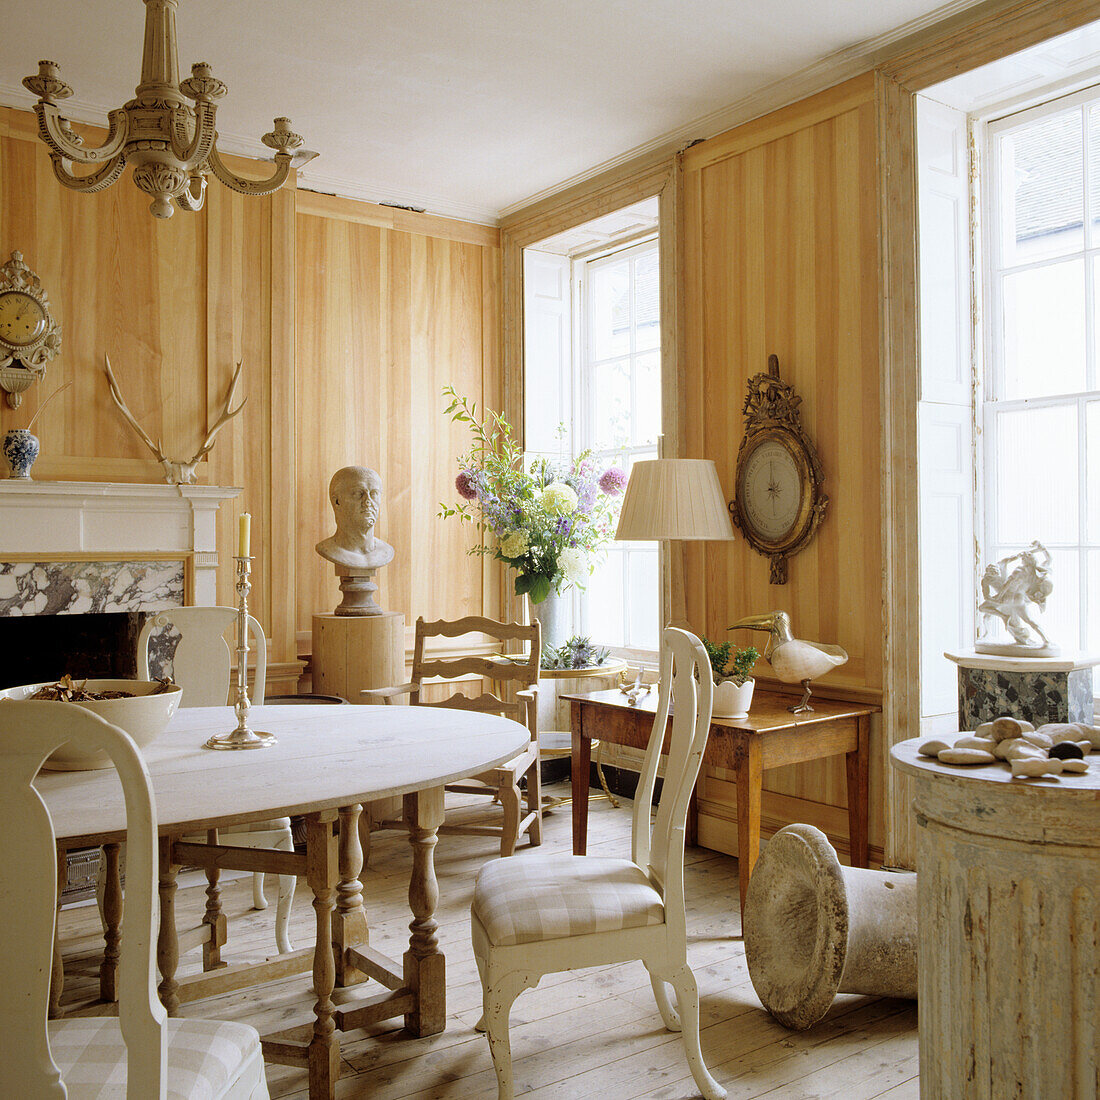 Wood-paneled dining room with antique furniture and floral decorations